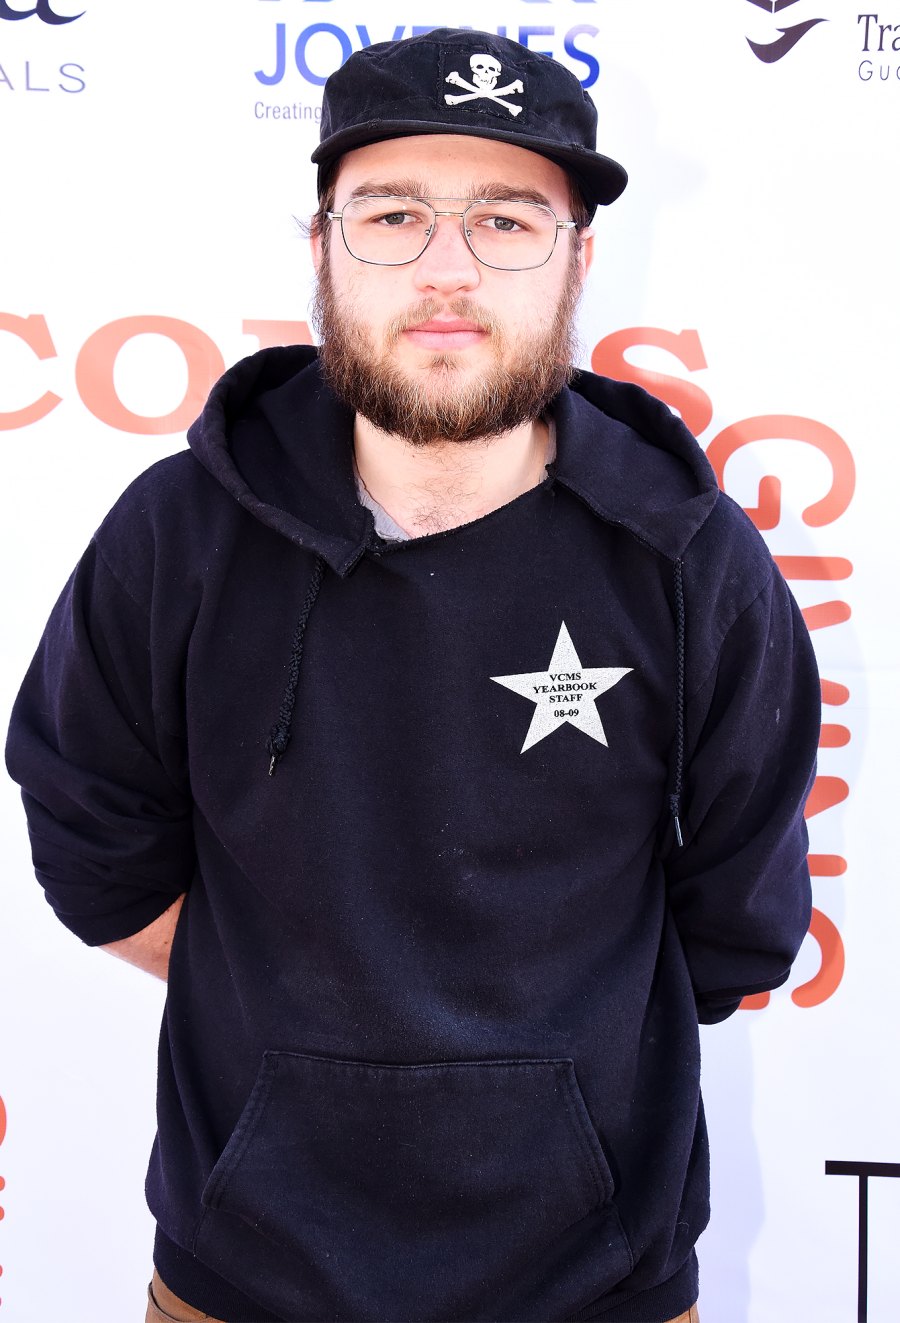 Two and a Half Men’ Alum Angus T. Jones Debuts a New Look While Out and About: Photos